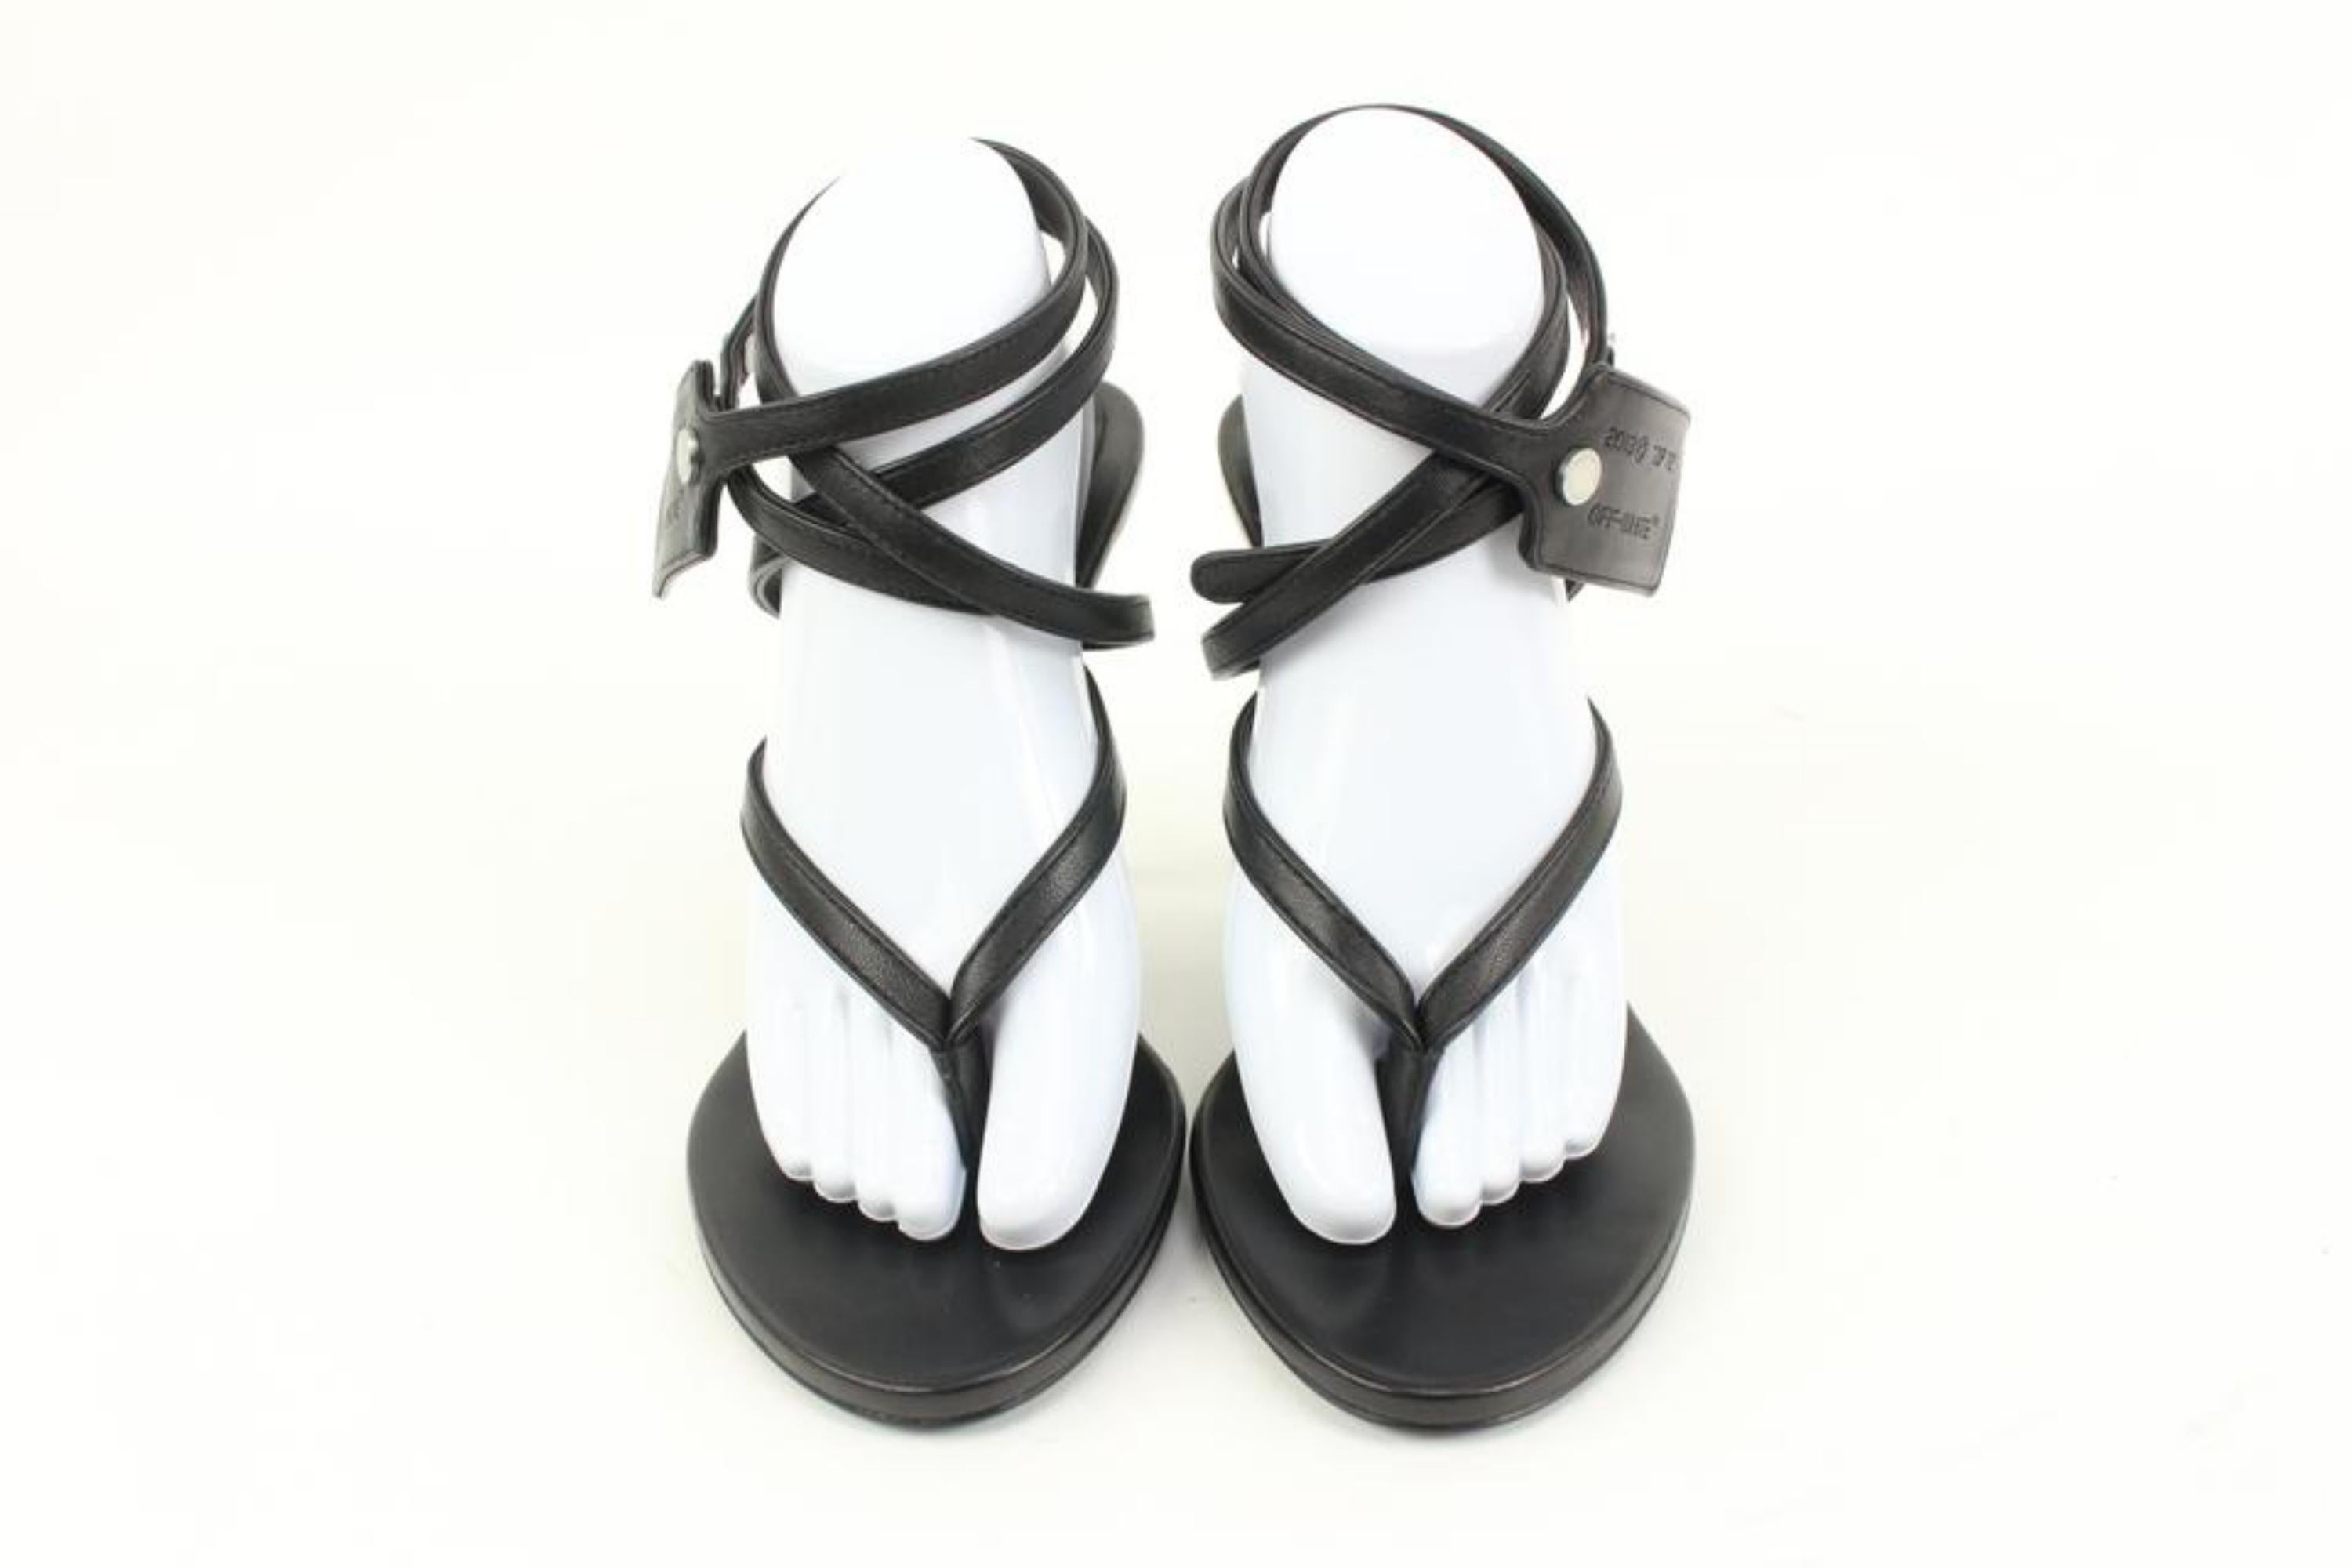 Off-White Size 41 Black Leather Zip Tie Sandal Heels 3of323s In New Condition For Sale In Dix hills, NY